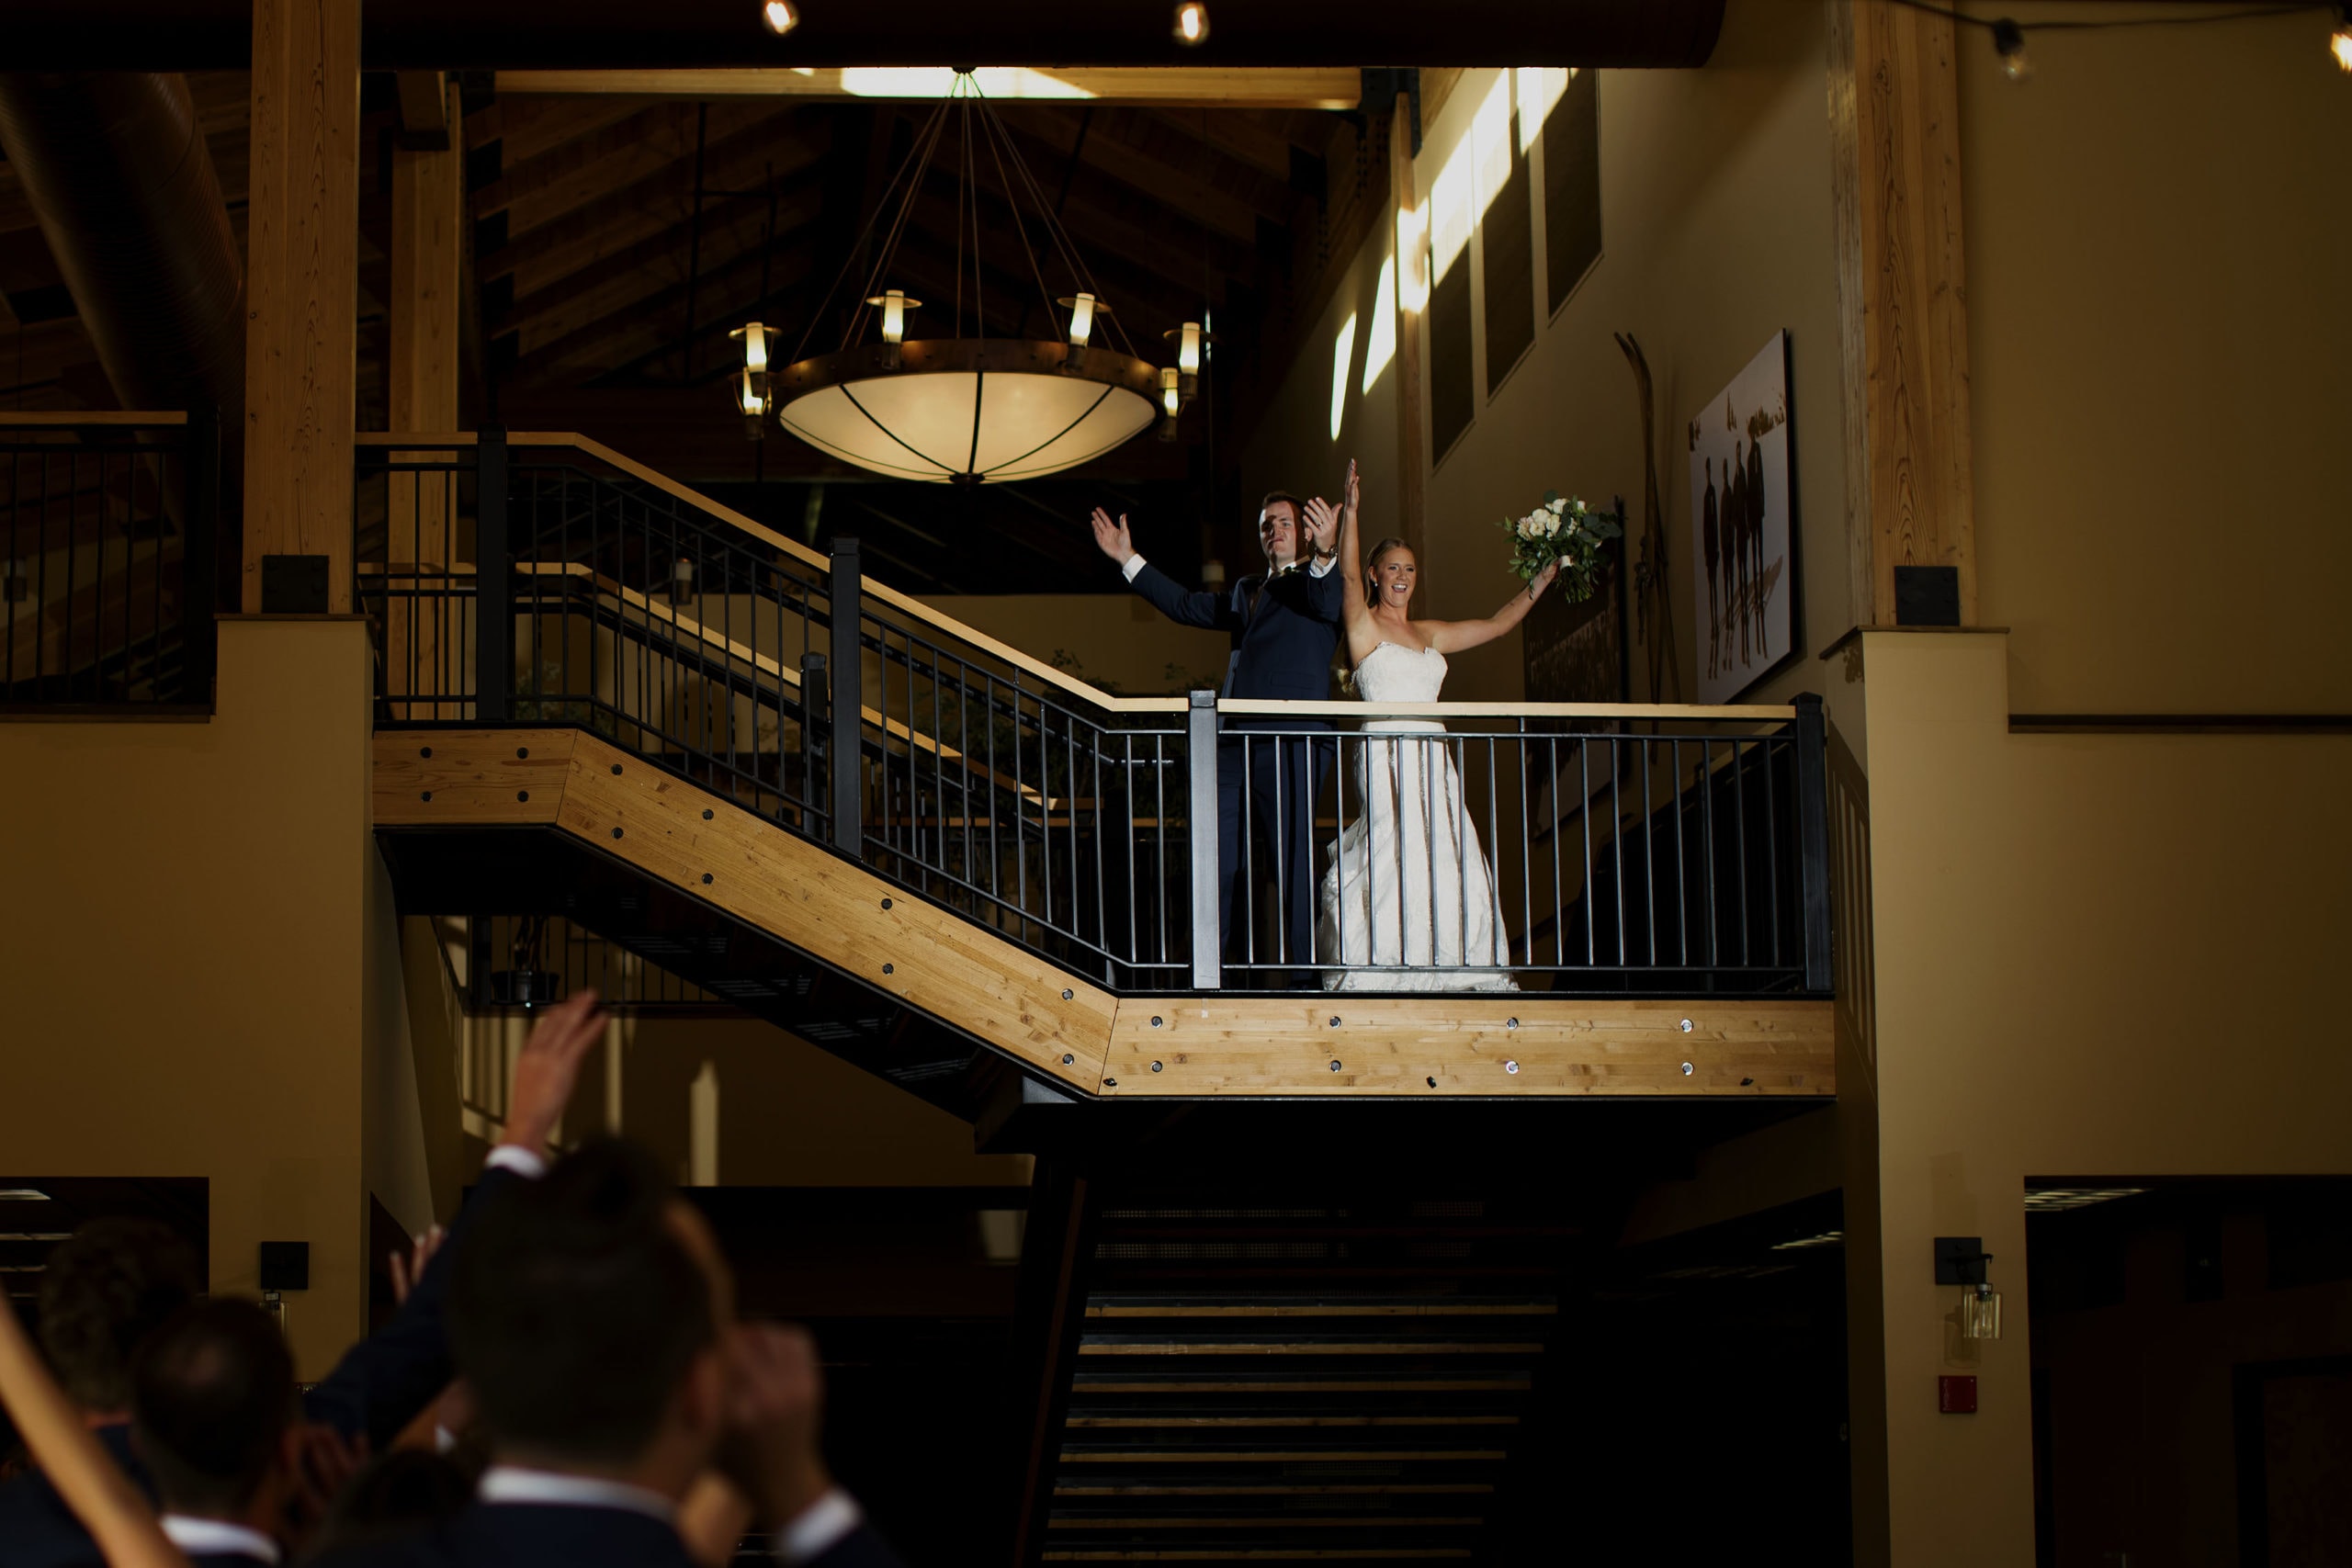 The bride and groom wave to guests from a balcony as they’re introduced in the Grand Hall at Copper Mountain